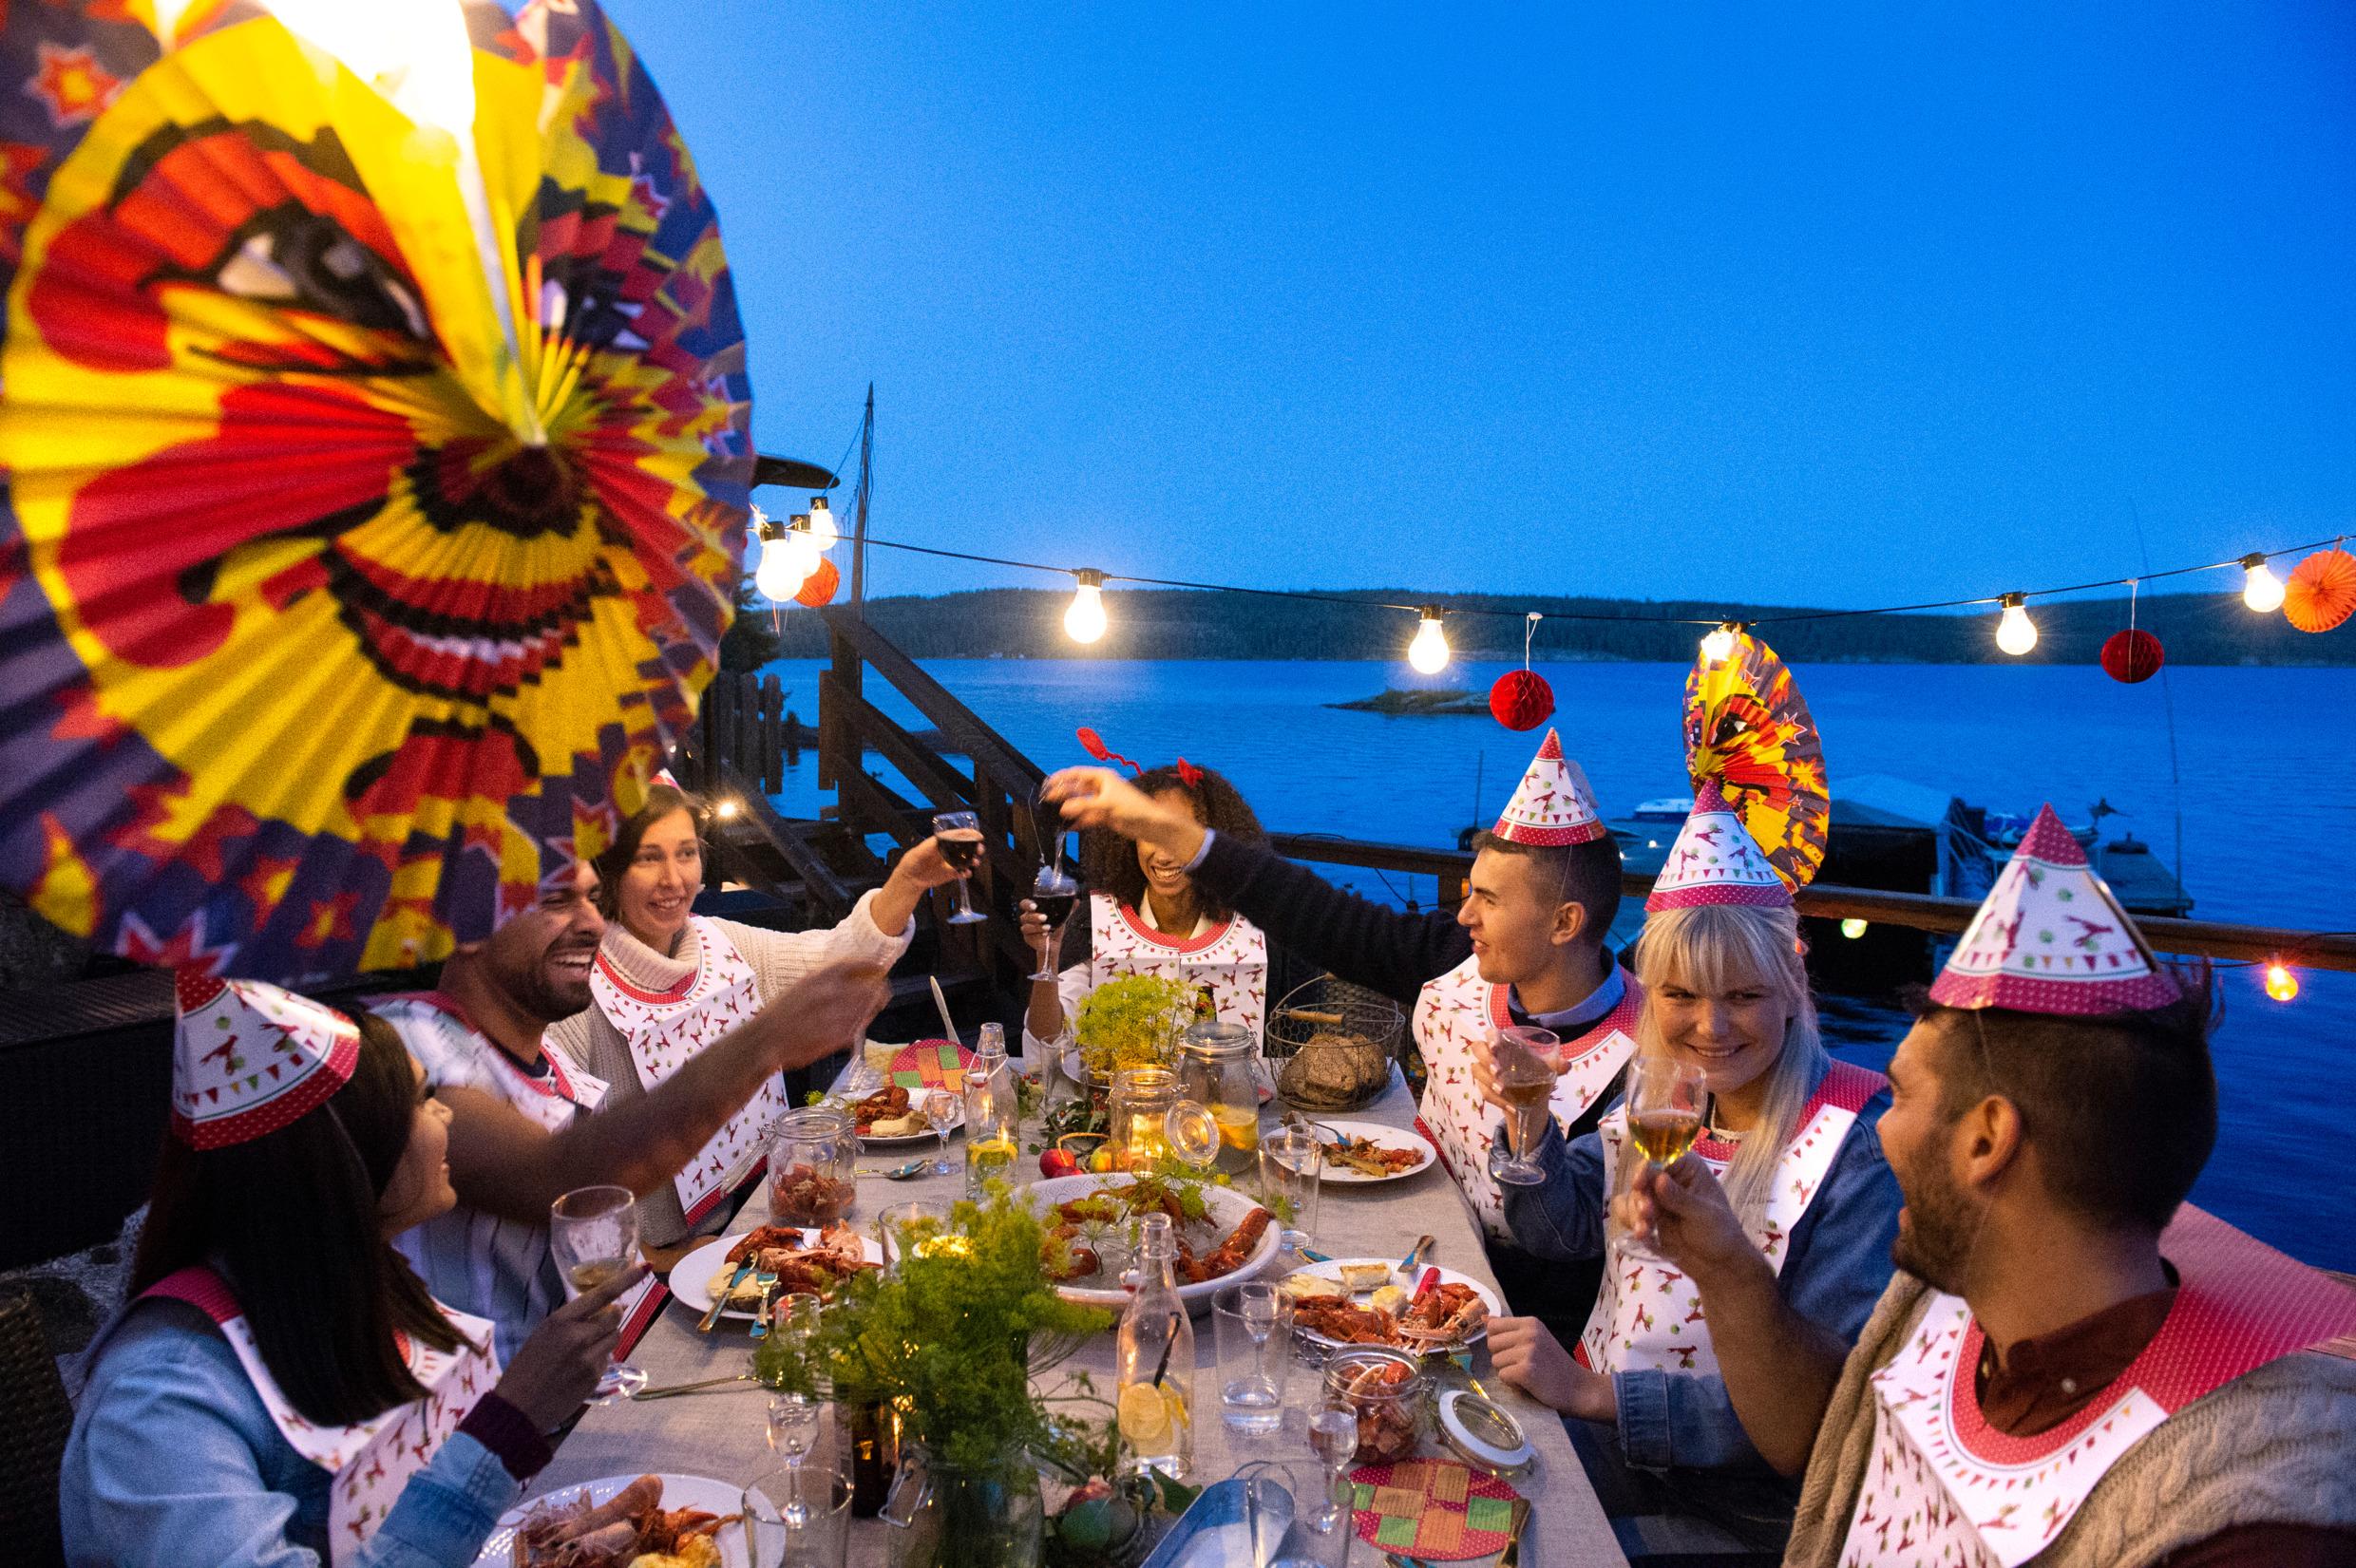 Crayfish party at a jetty by the sea. Seven peoples around a table dressed in paper hats and bibs are eating crayfish and toasting with beer and wine. There are paper lanterns hanging above the table.